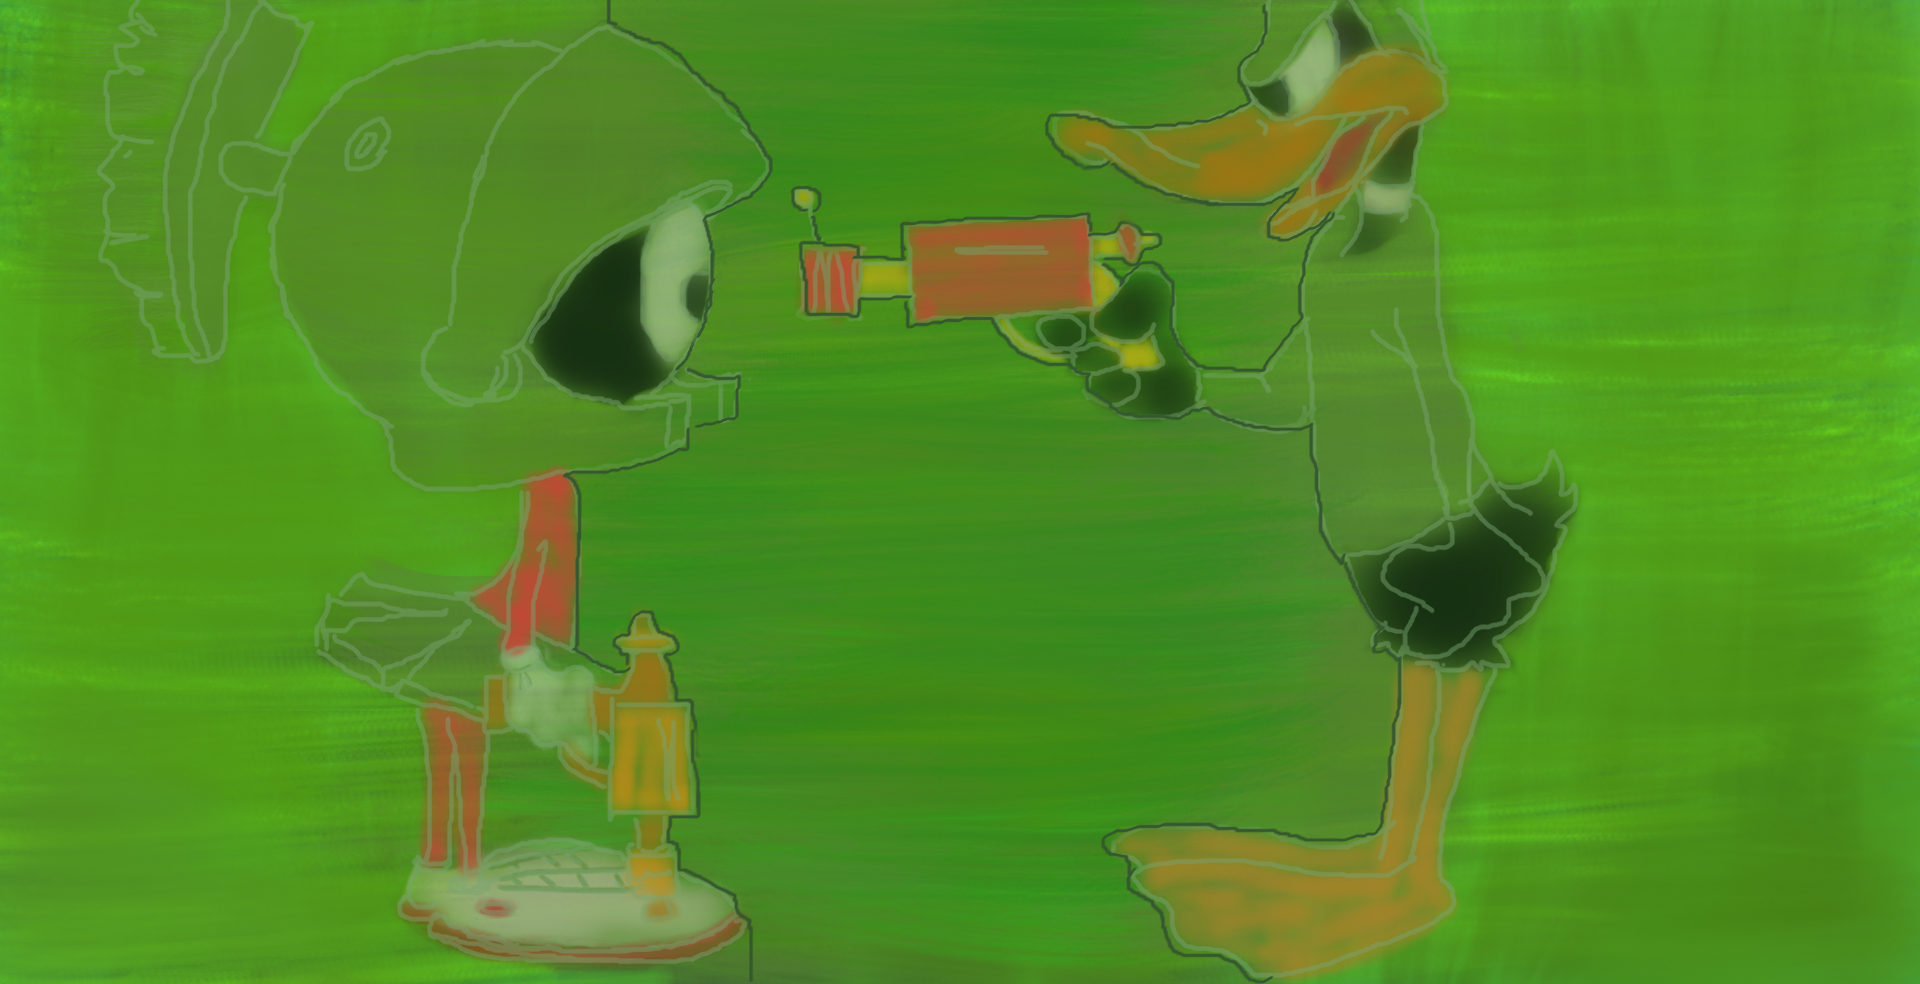 Watercolor painting, with a green background. Daffy Duck is shown pointing a ray gun at Marvin the Martian.